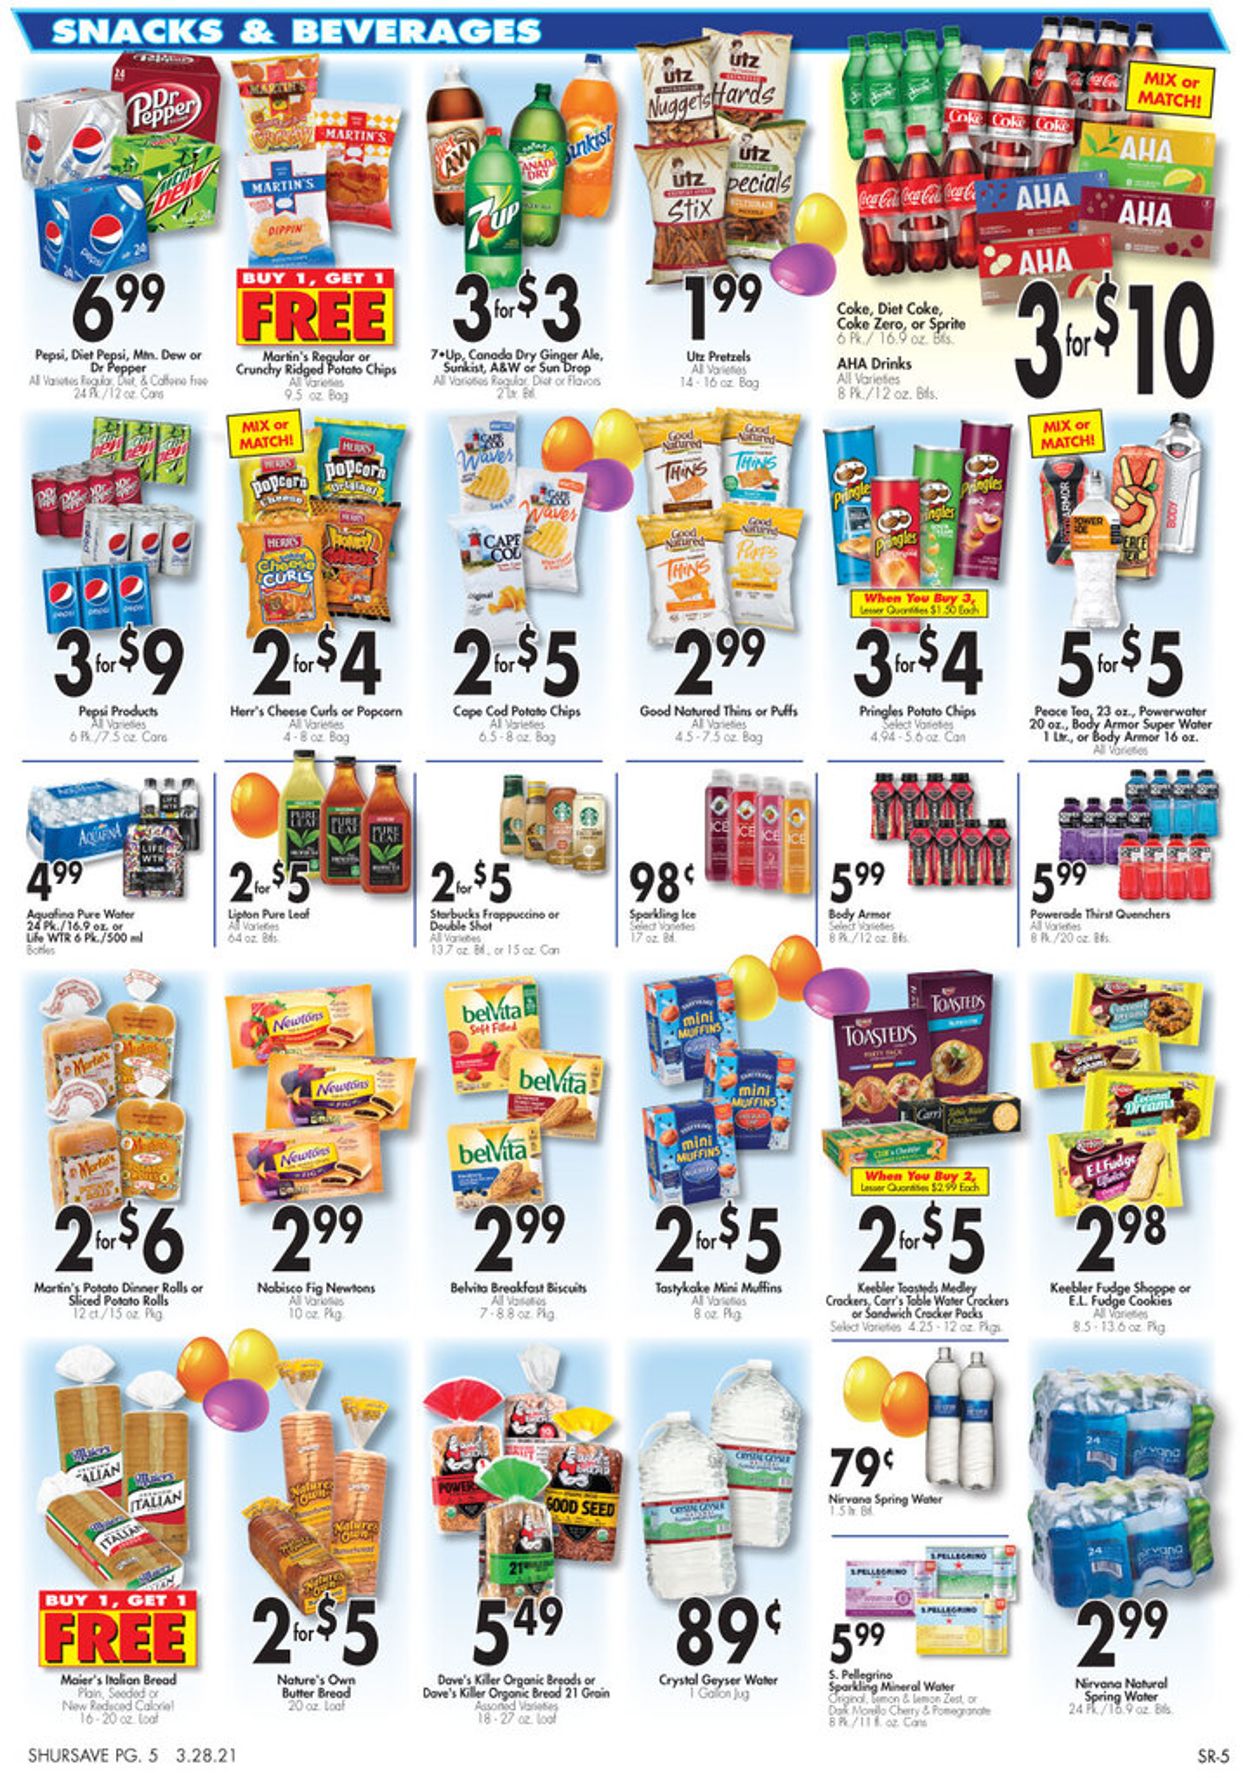 Gerrity's Supermarkets Ad from 03/28/2021